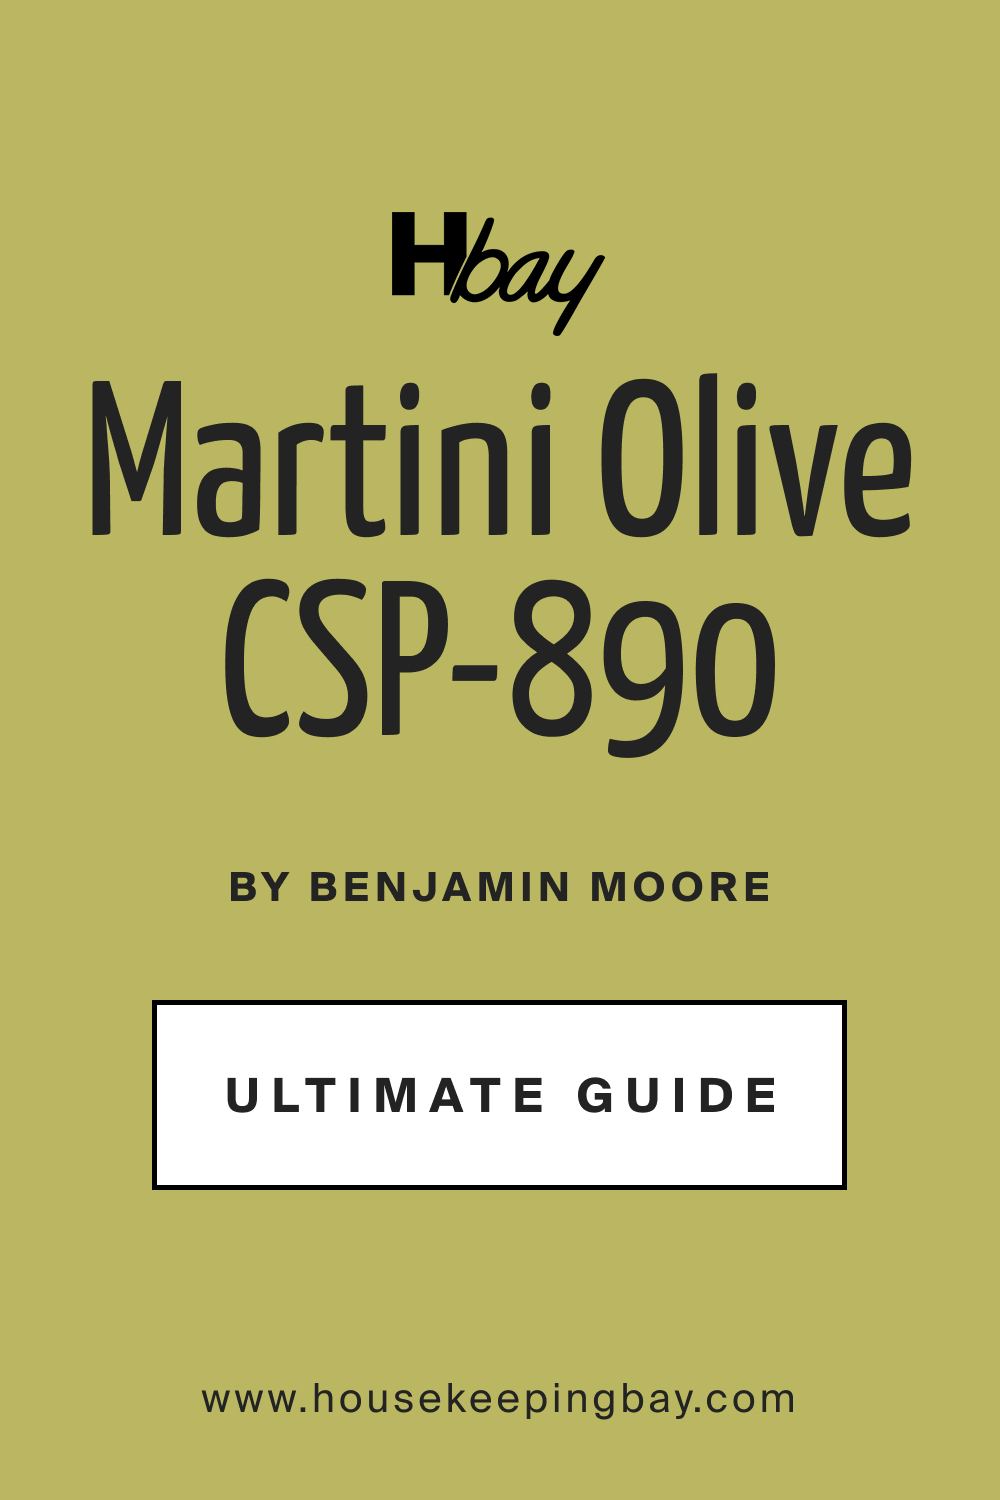  Ultimate Guide of Martini Olive CSP-890 Paint Color by Benjamin Moore